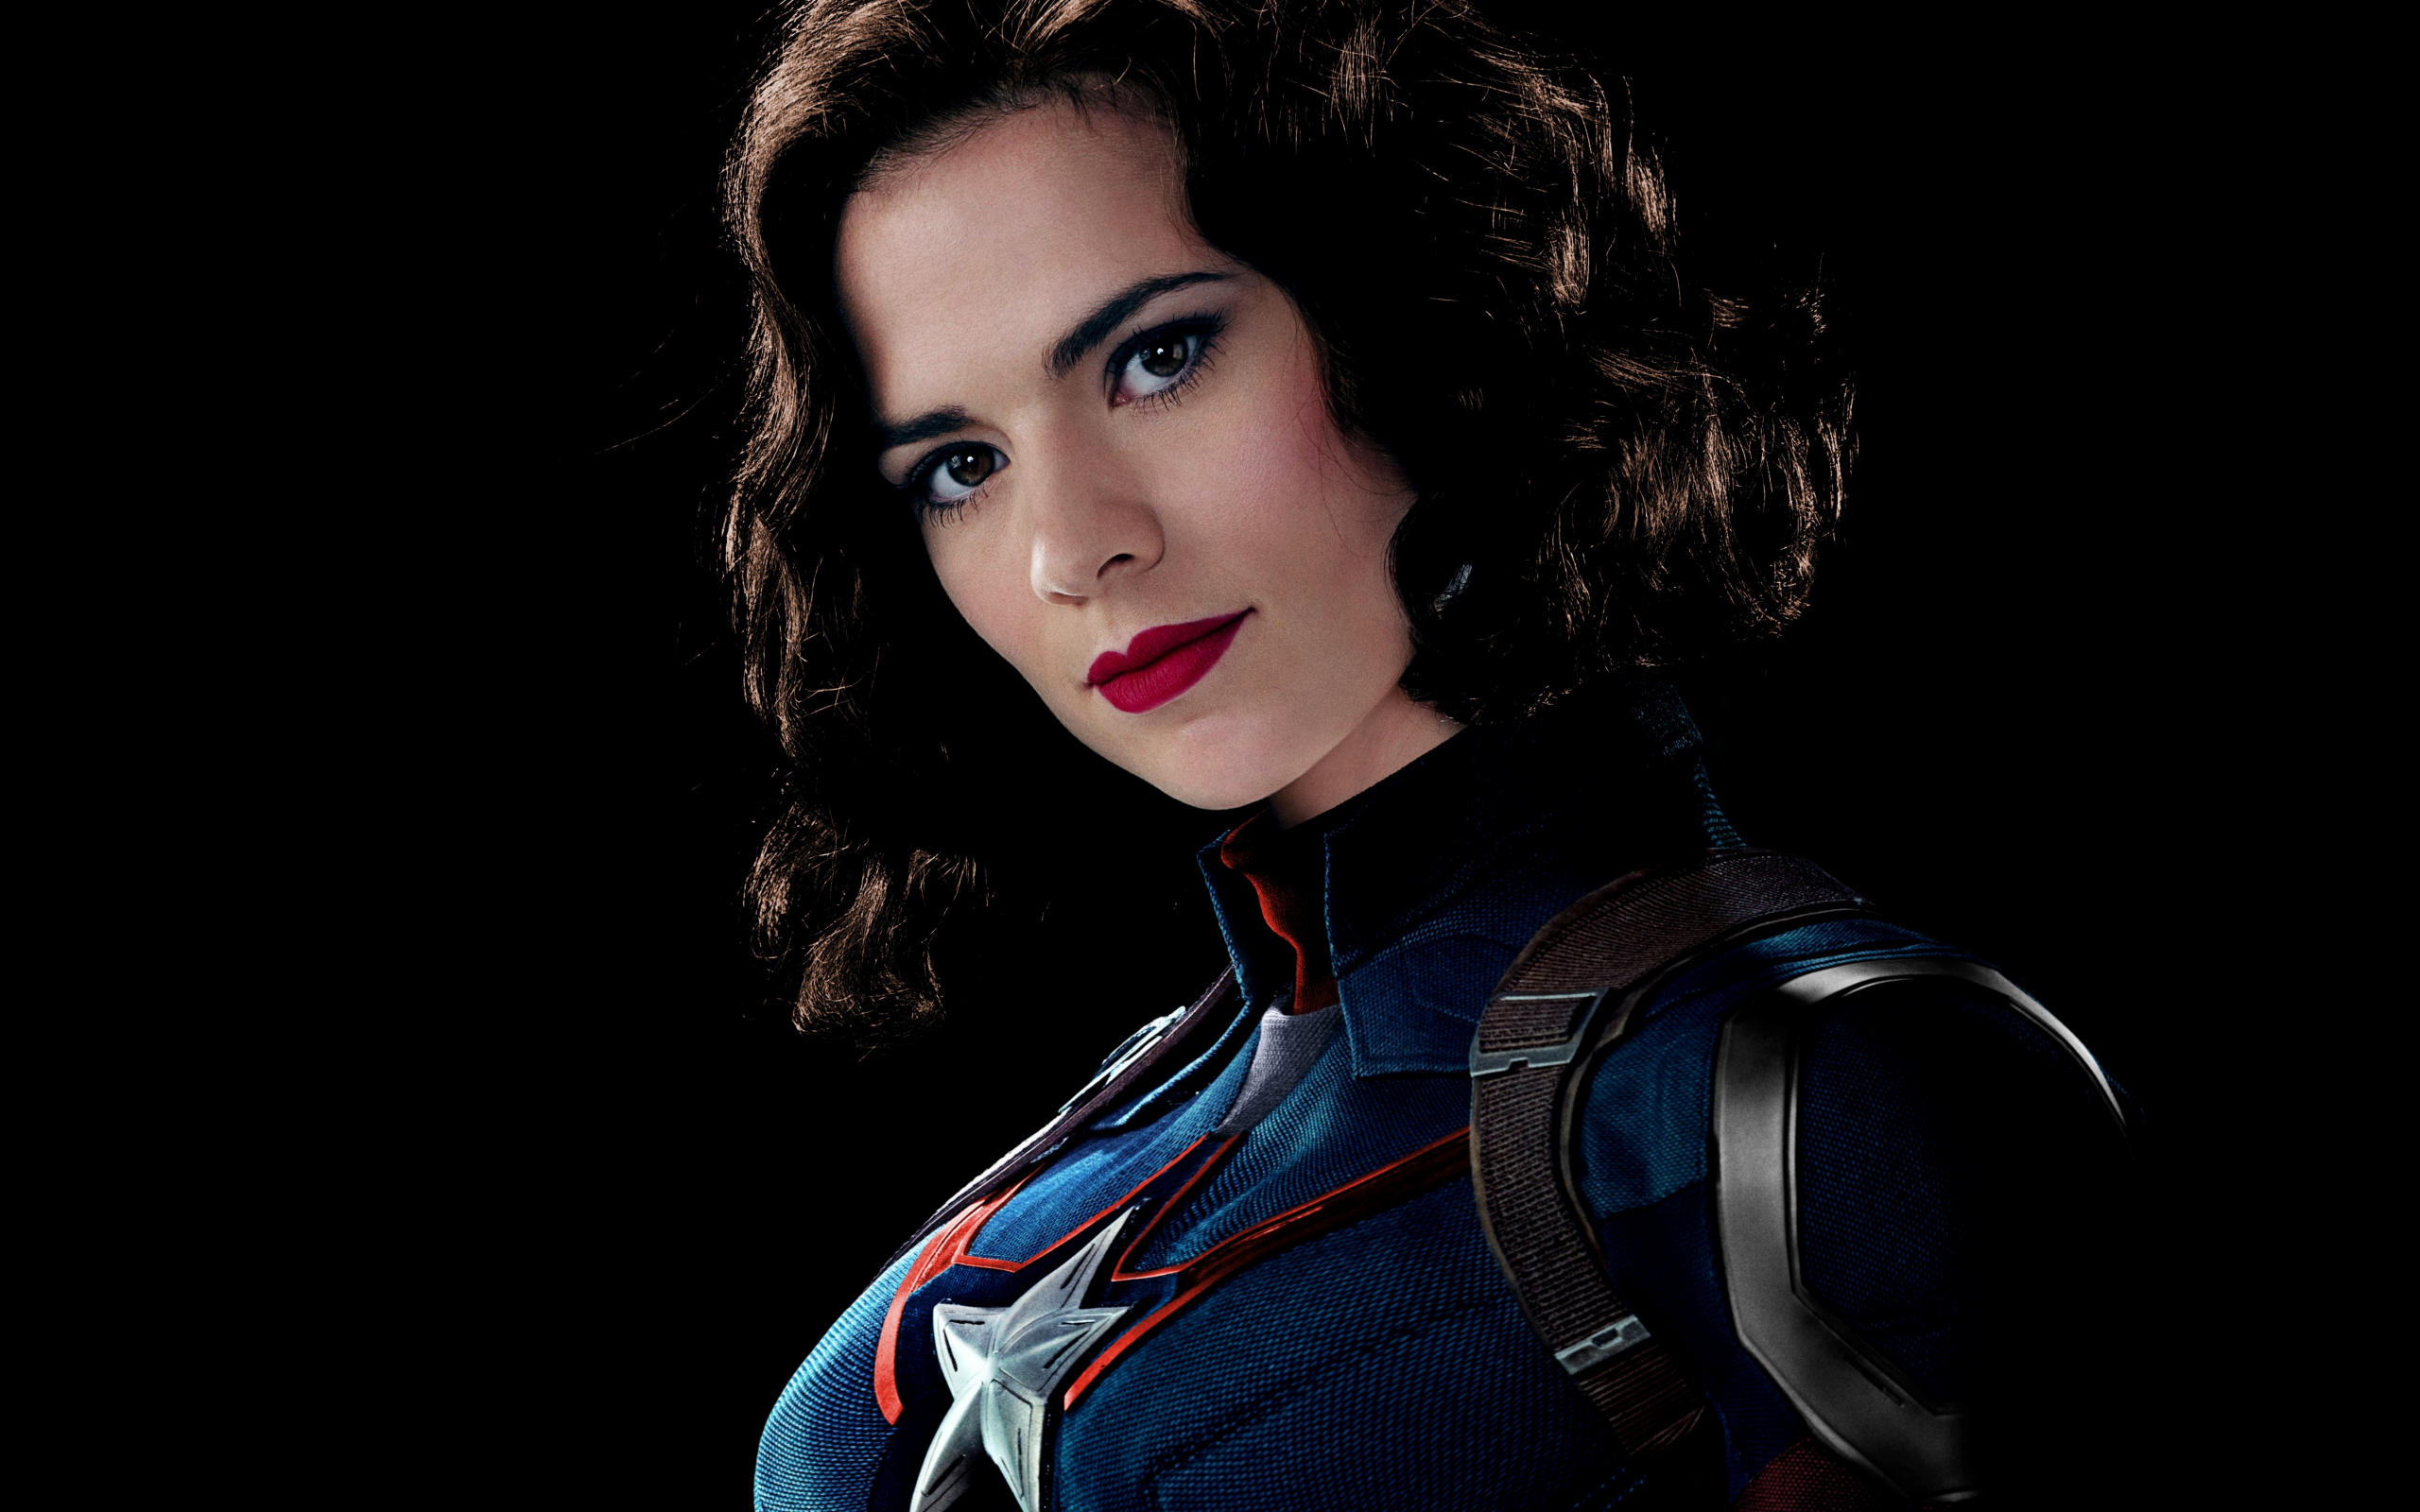 Download 2560x1600 Wallpaper Peggy Carter Hayley Atwell Captain Images, Photos, Reviews